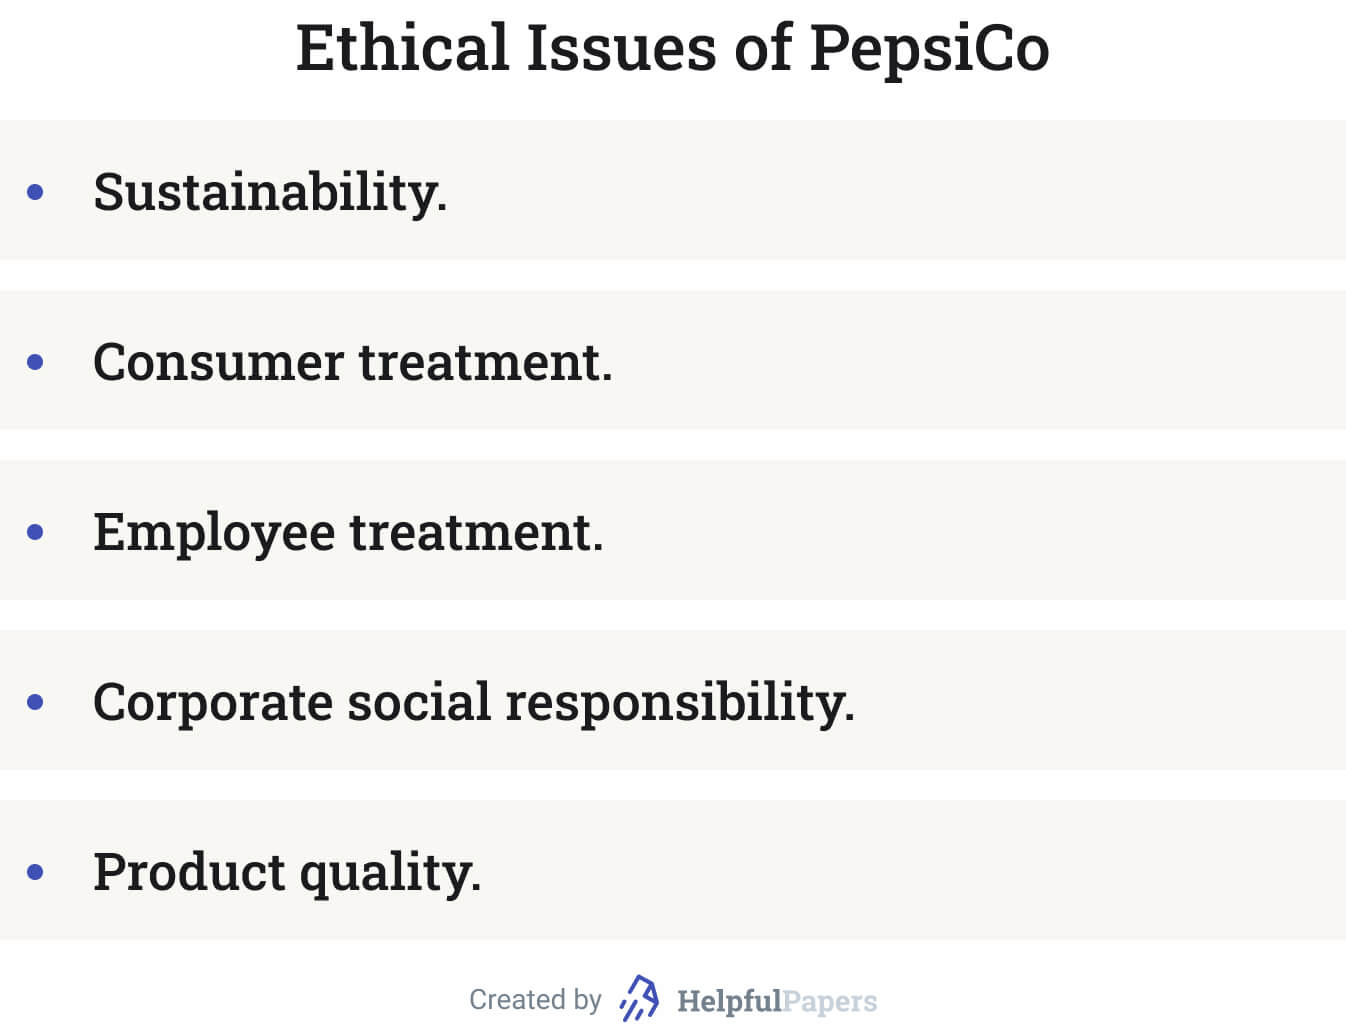 The picture provides examples of PepsiCo's ethical issues.